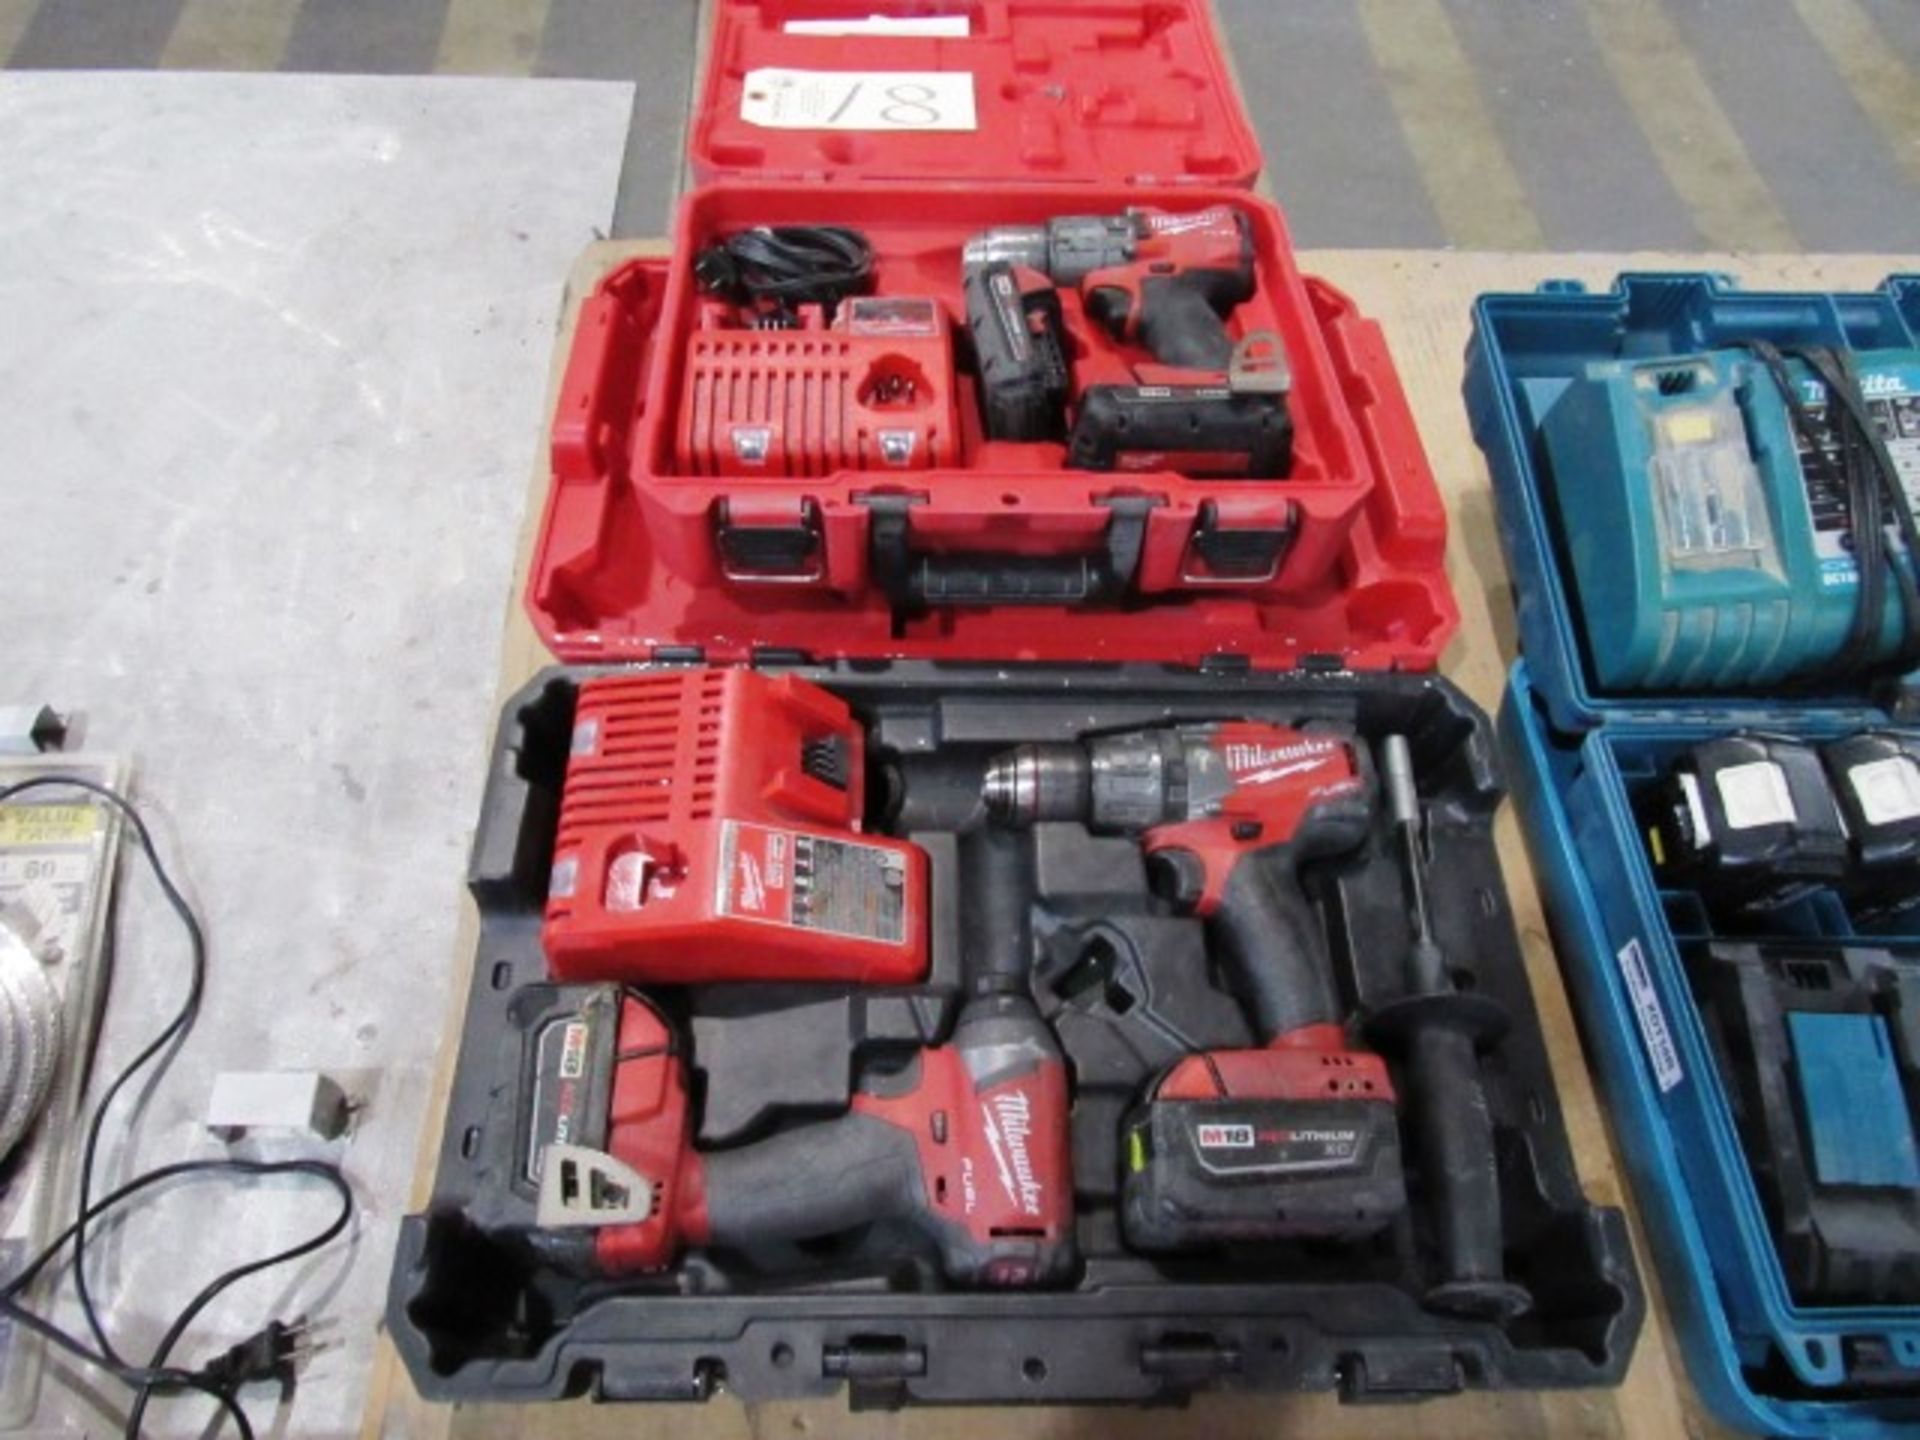 (2) Milwaukee Drills, (1) Driver, (3) Batteries, (2) Chargers